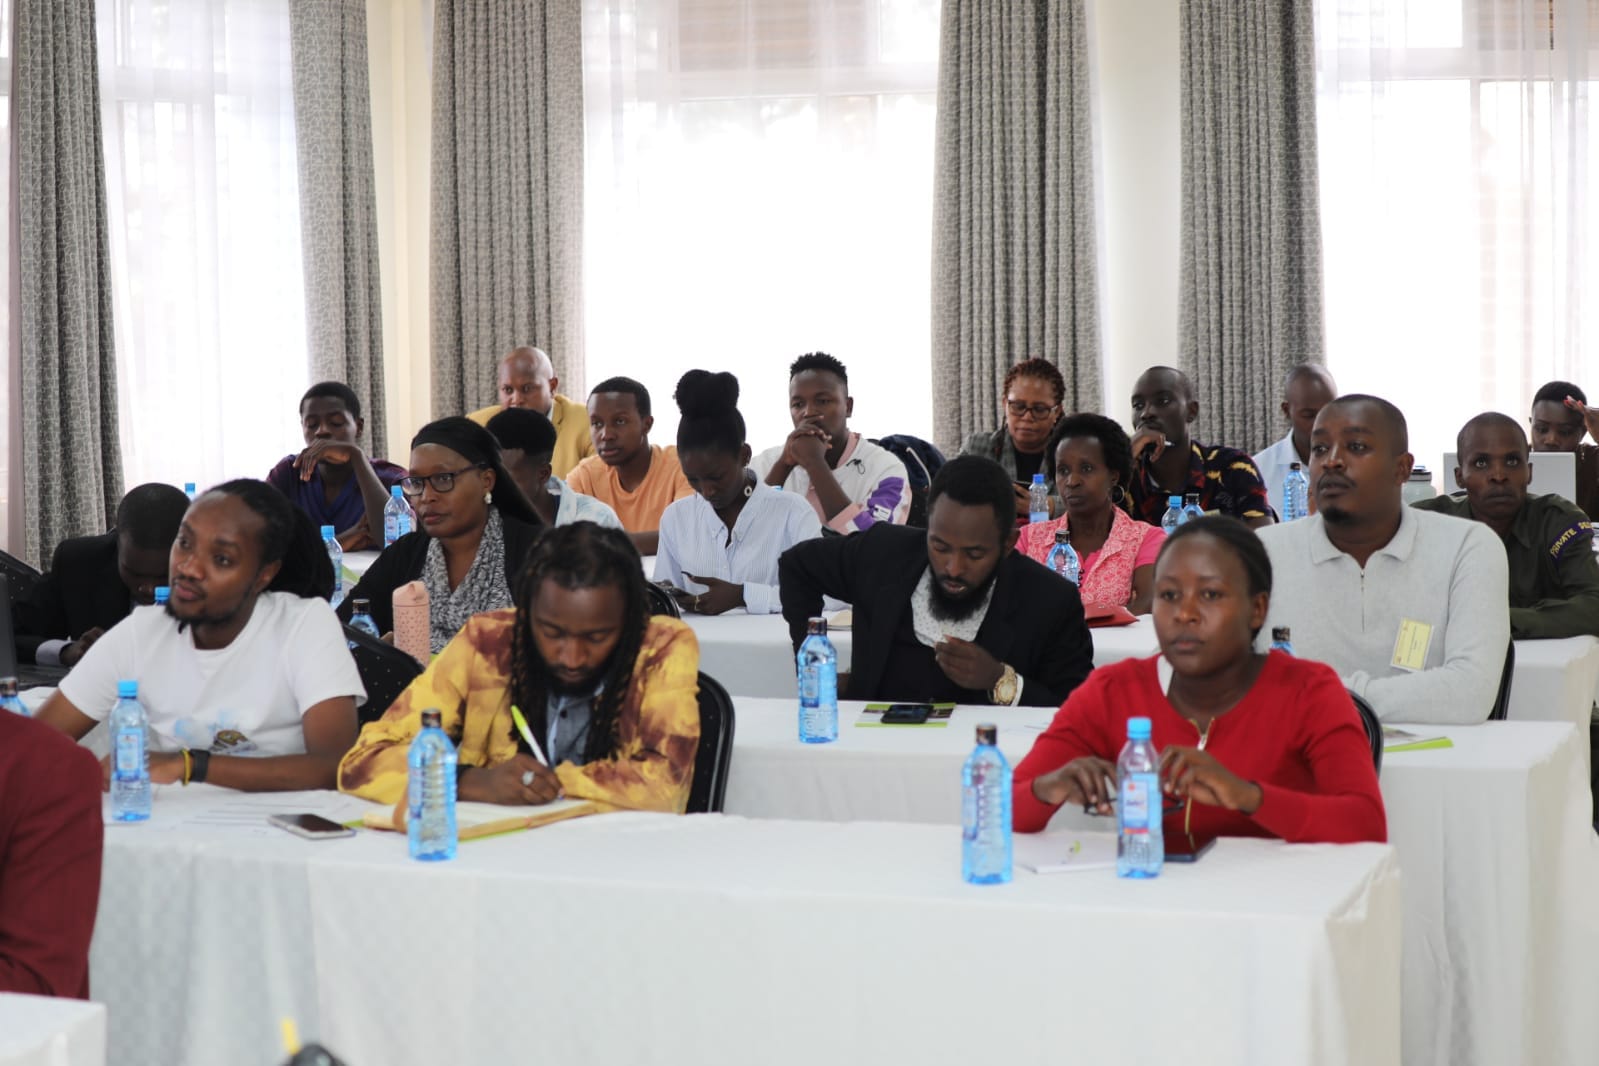 Board conducts a consultative forum on the proposed Films and Stage Plays Regulations in the Eastern Region